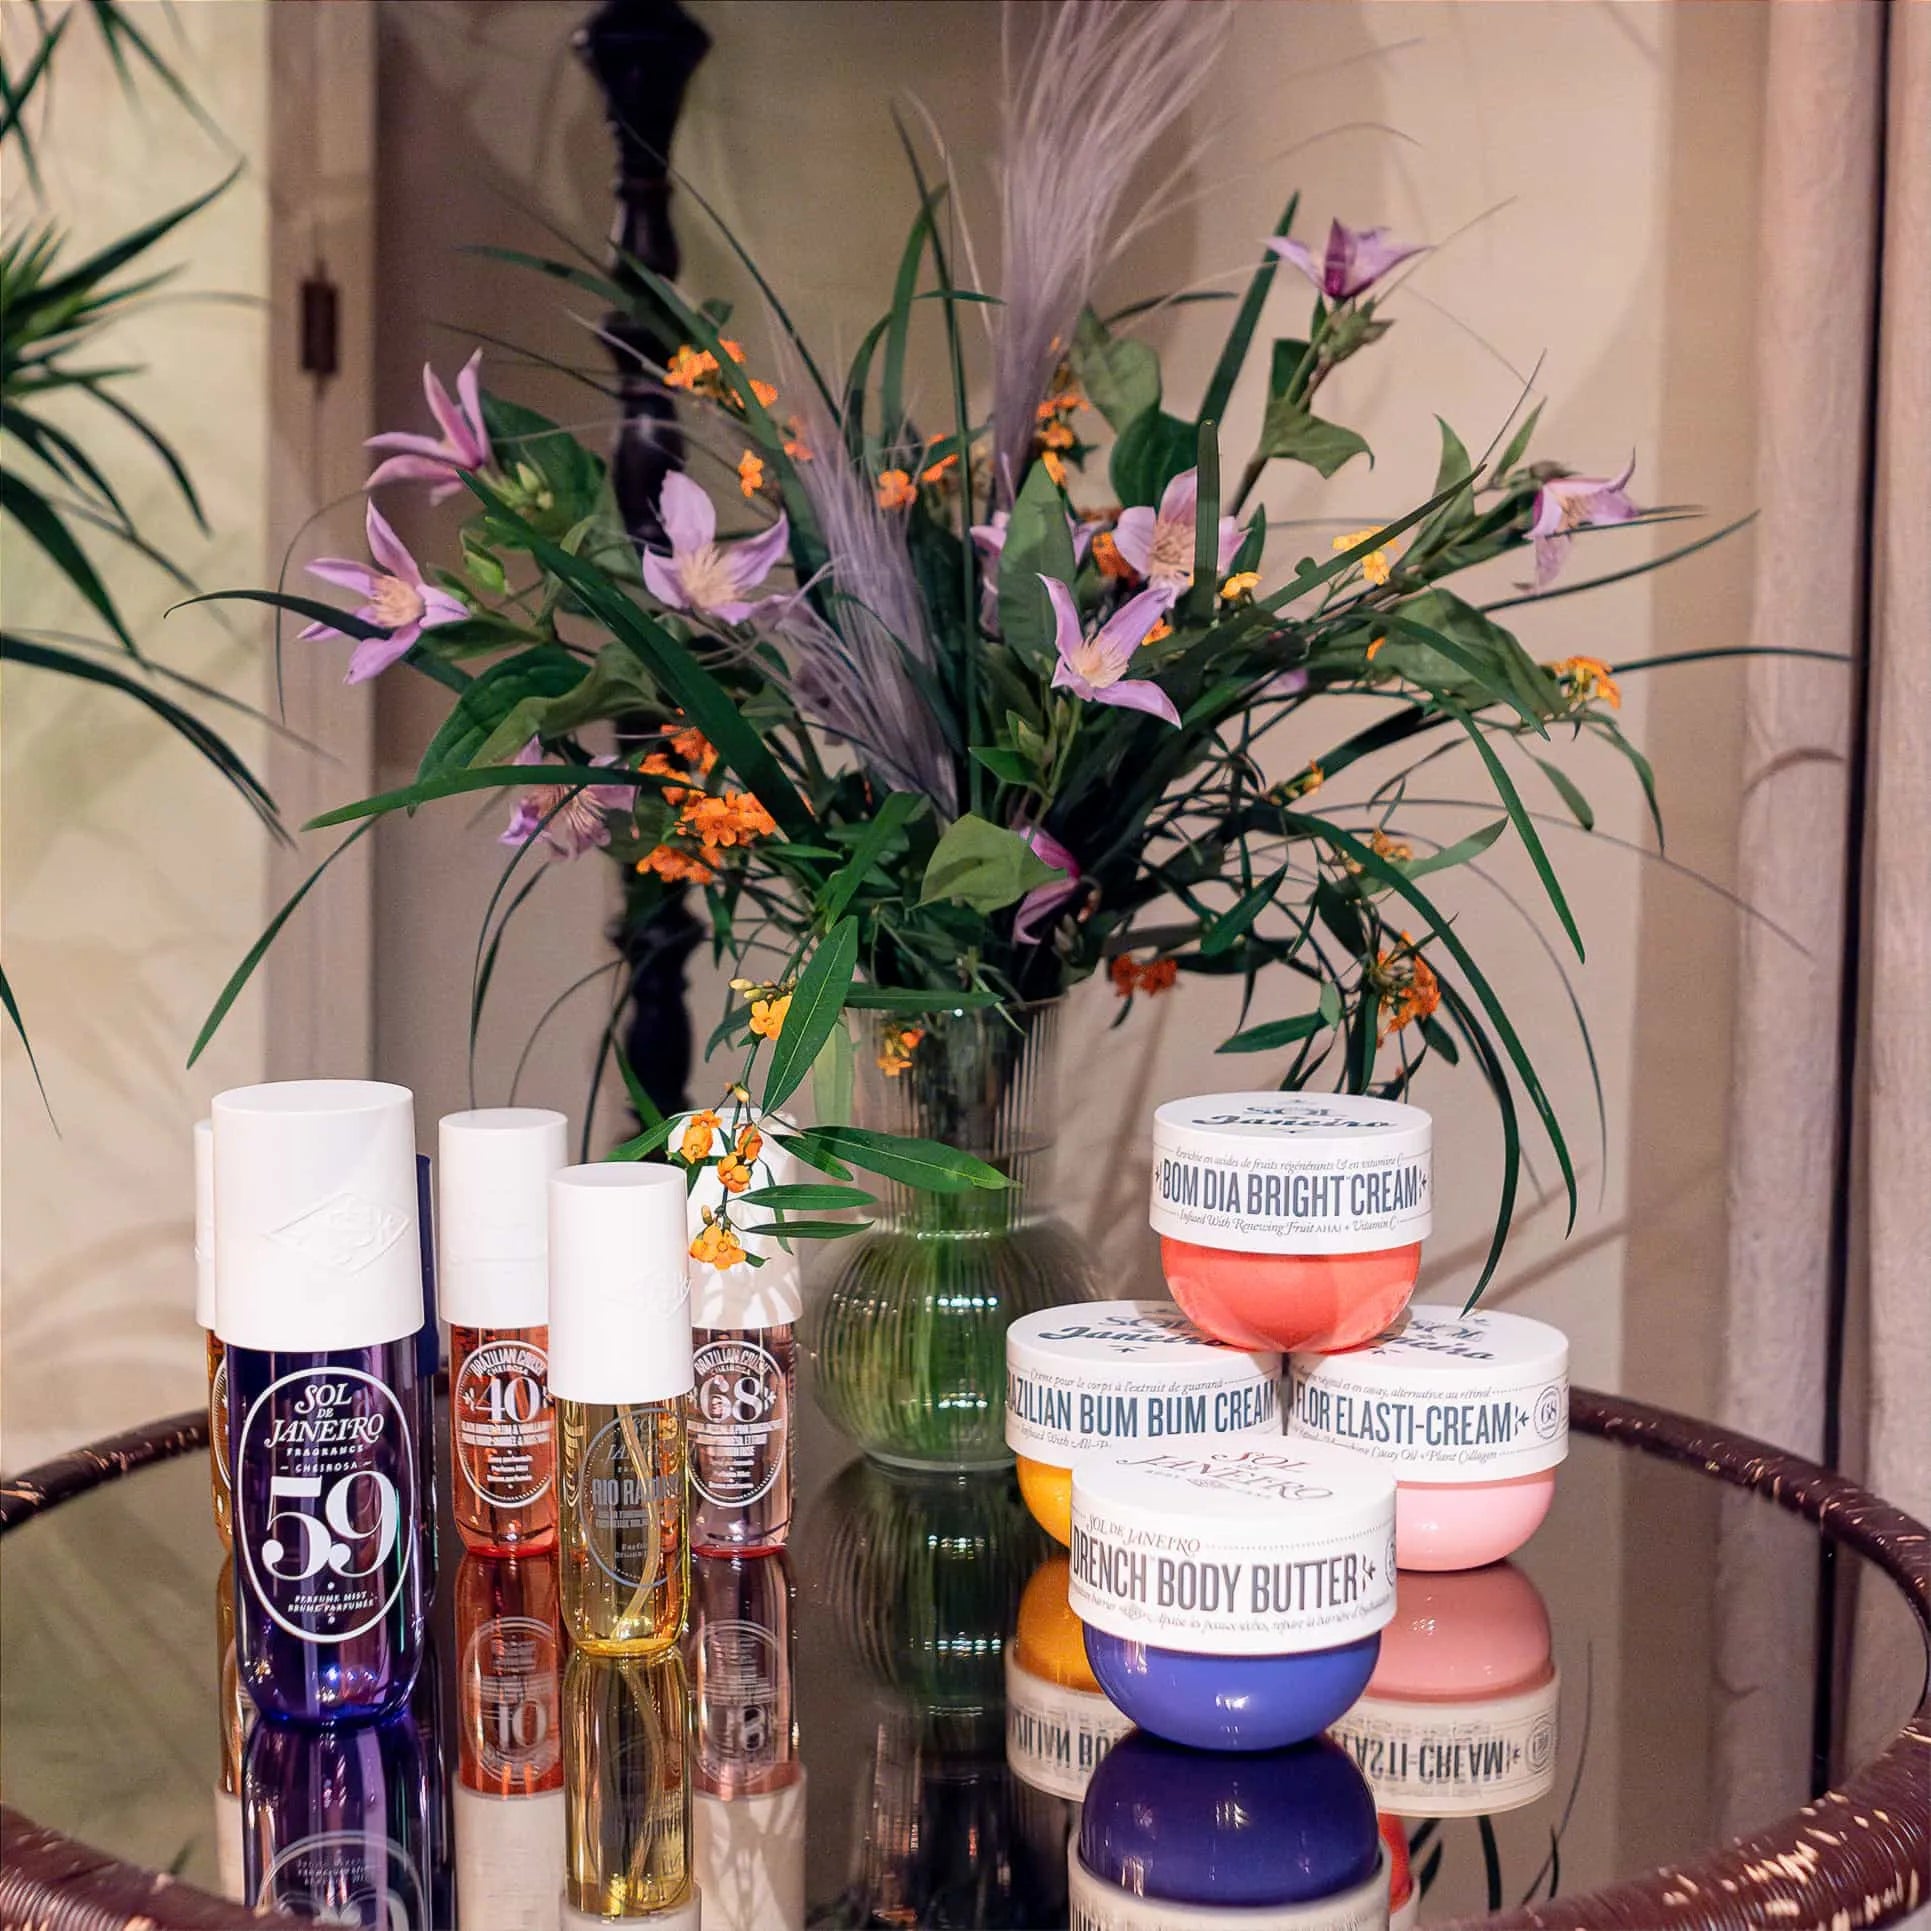 Sol de Janeiro skincare collection including Bom Dia Bright Cream and Brazilian Bum Bum Cream displayed on a glass table with Amaranté London's floral arrangement in the background.